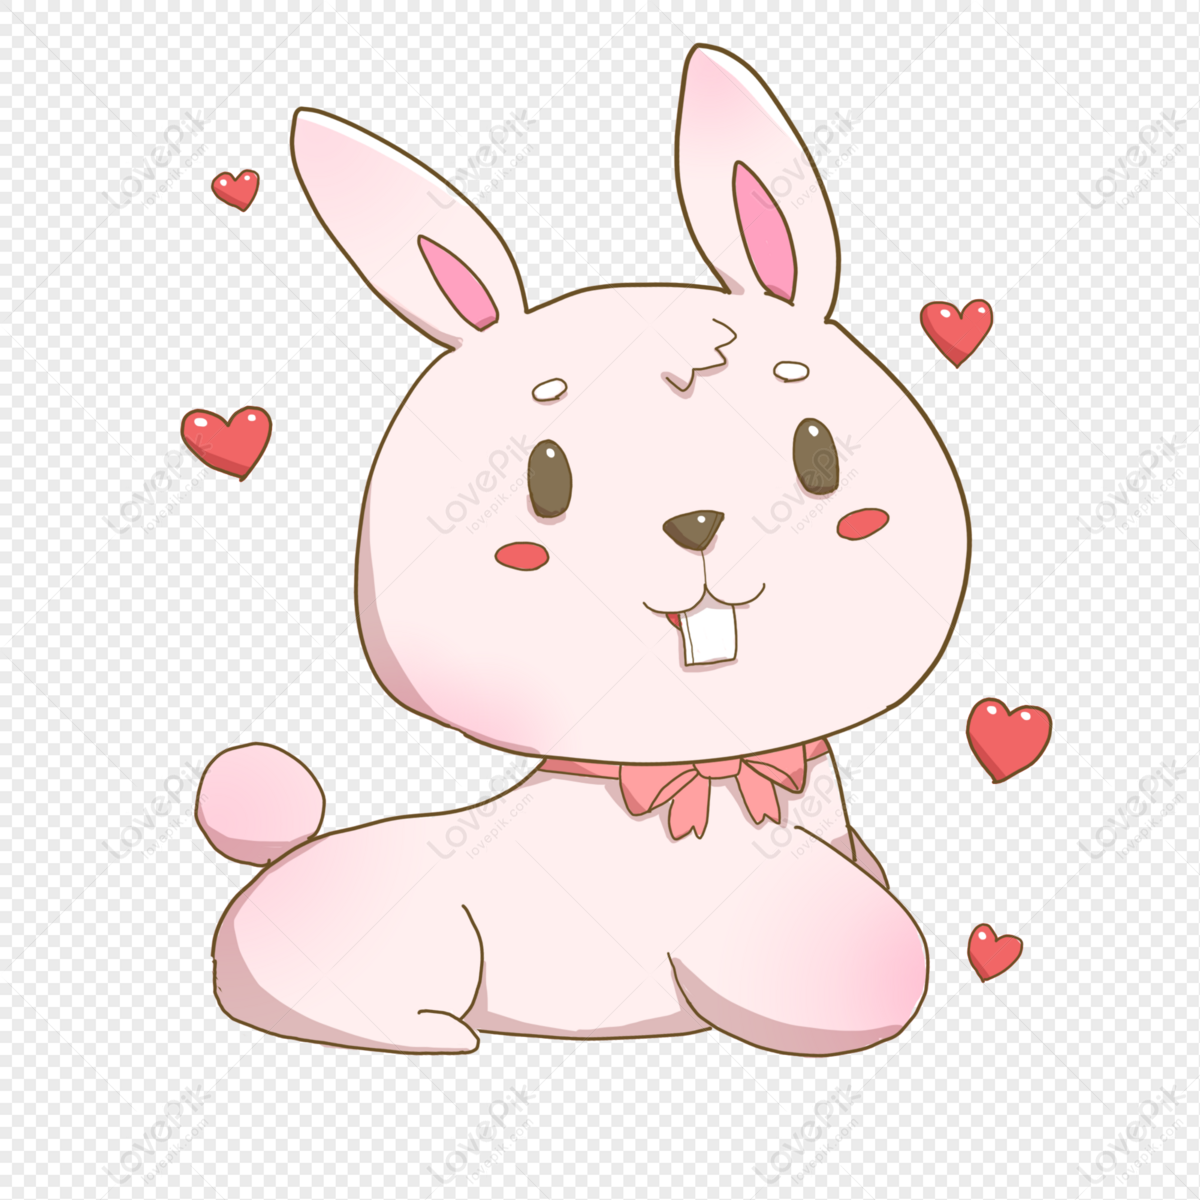 Cute Cartoon Rabbit PNG Image Free Download And Clipart Image For Free ...